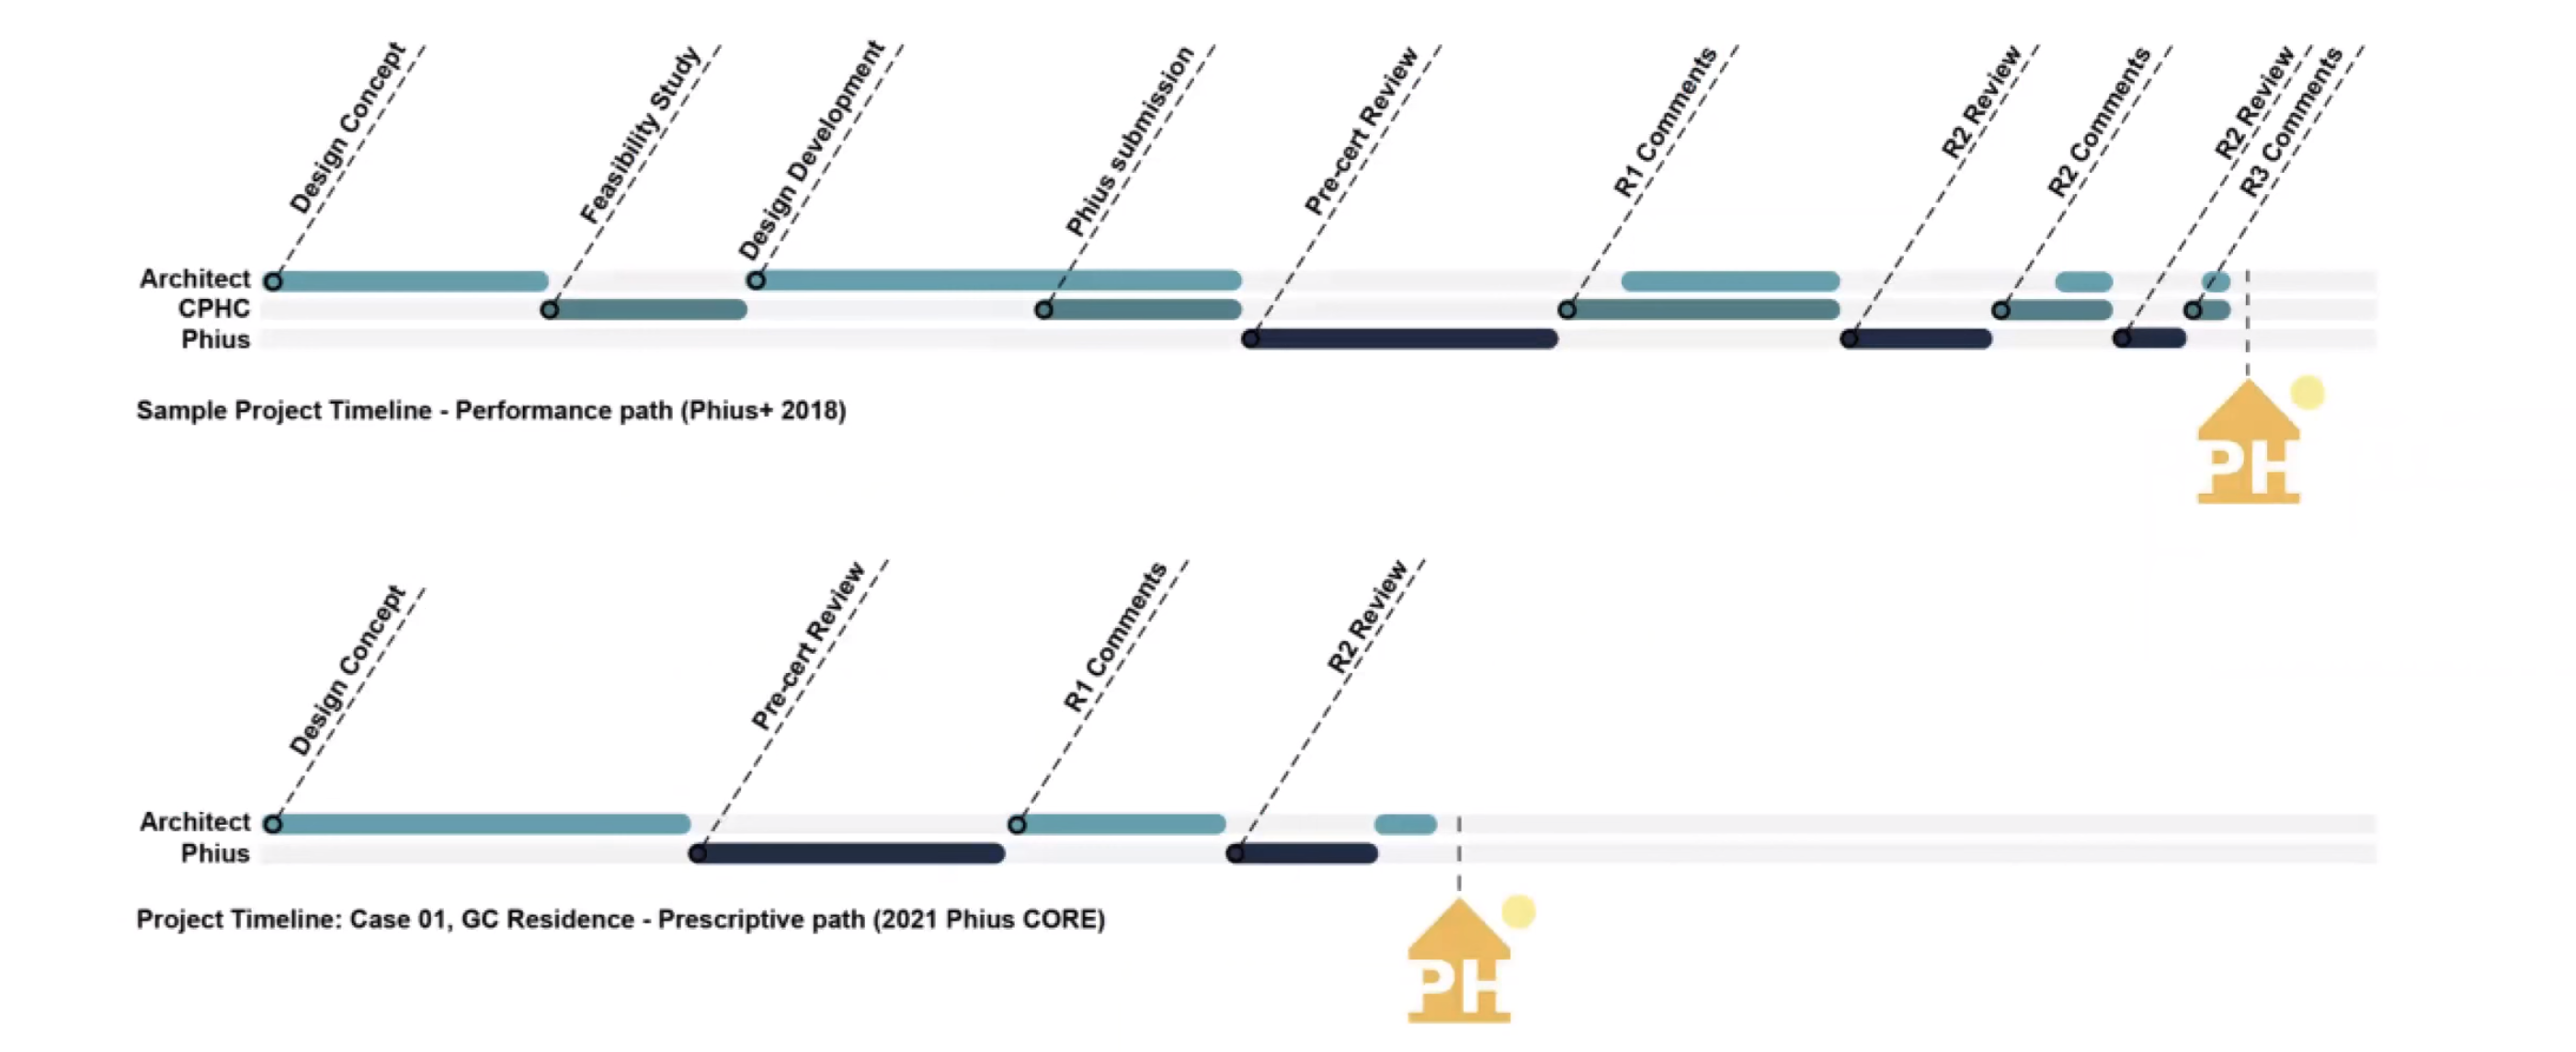 Example of updated project timeline with Phius CORE vs. the Phius+ 2018 Performance path